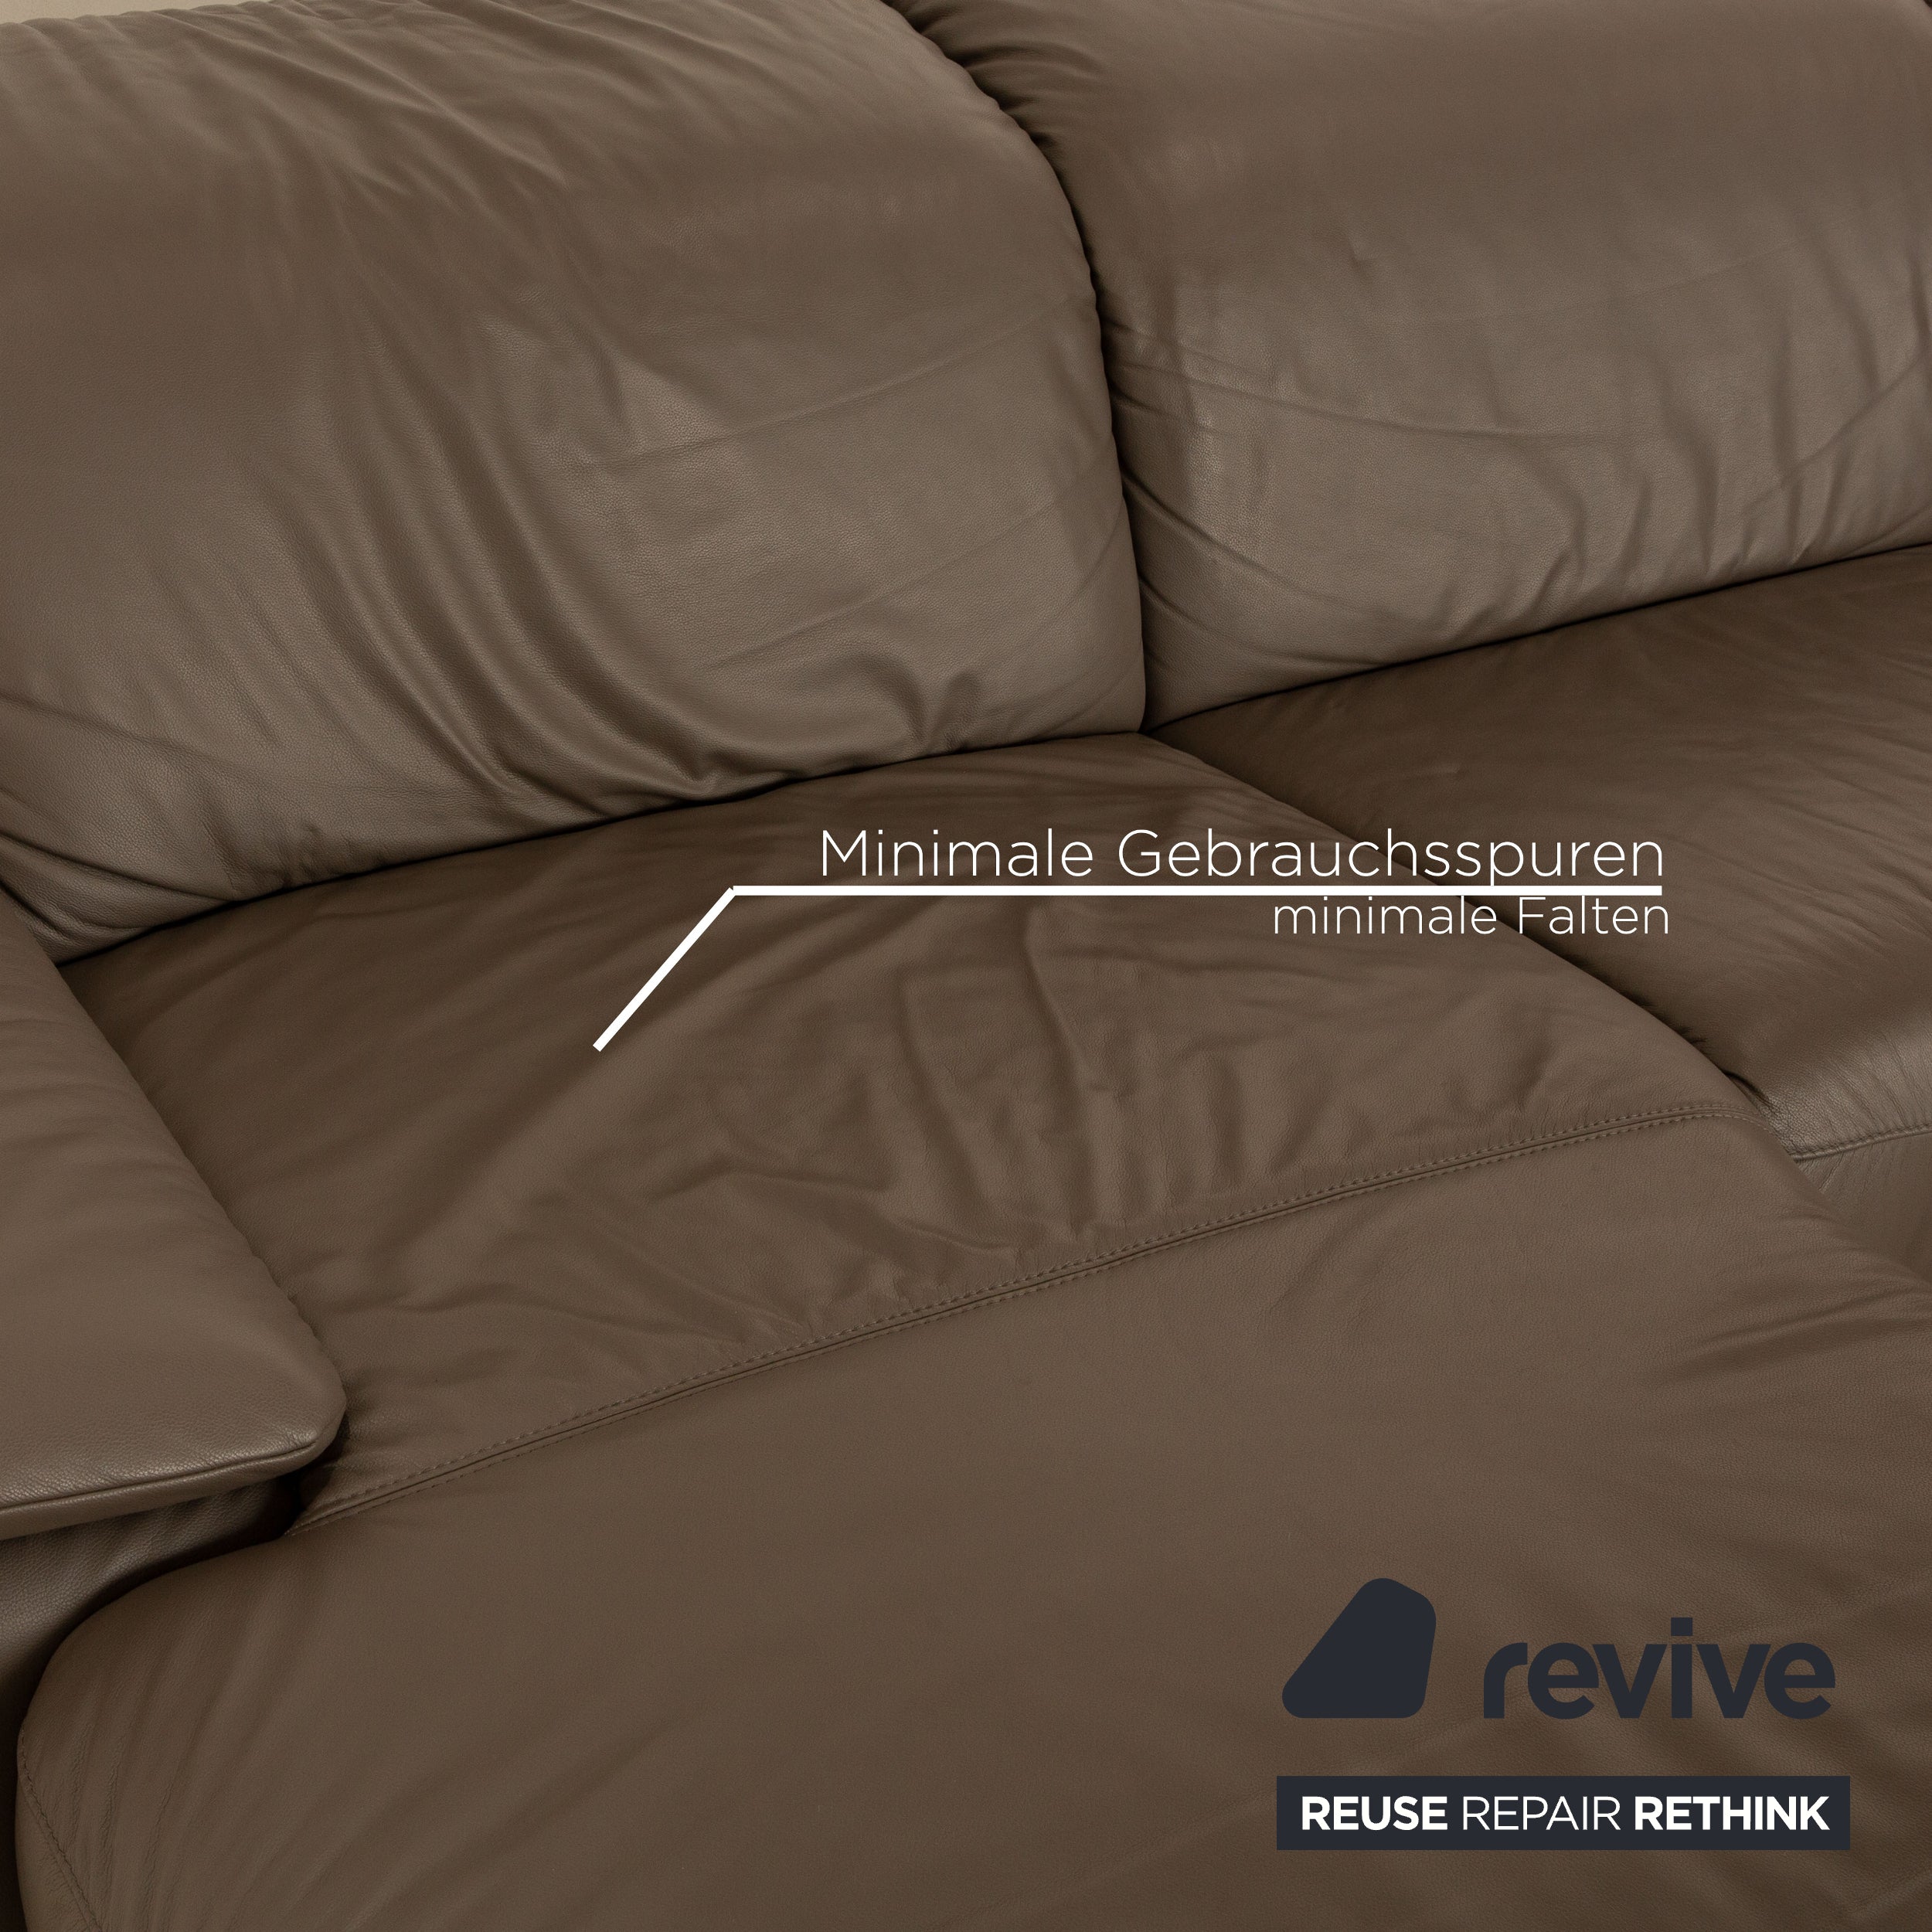 Sample ring leather corner sofa gray taupe electric function chaise longue left sofa couch